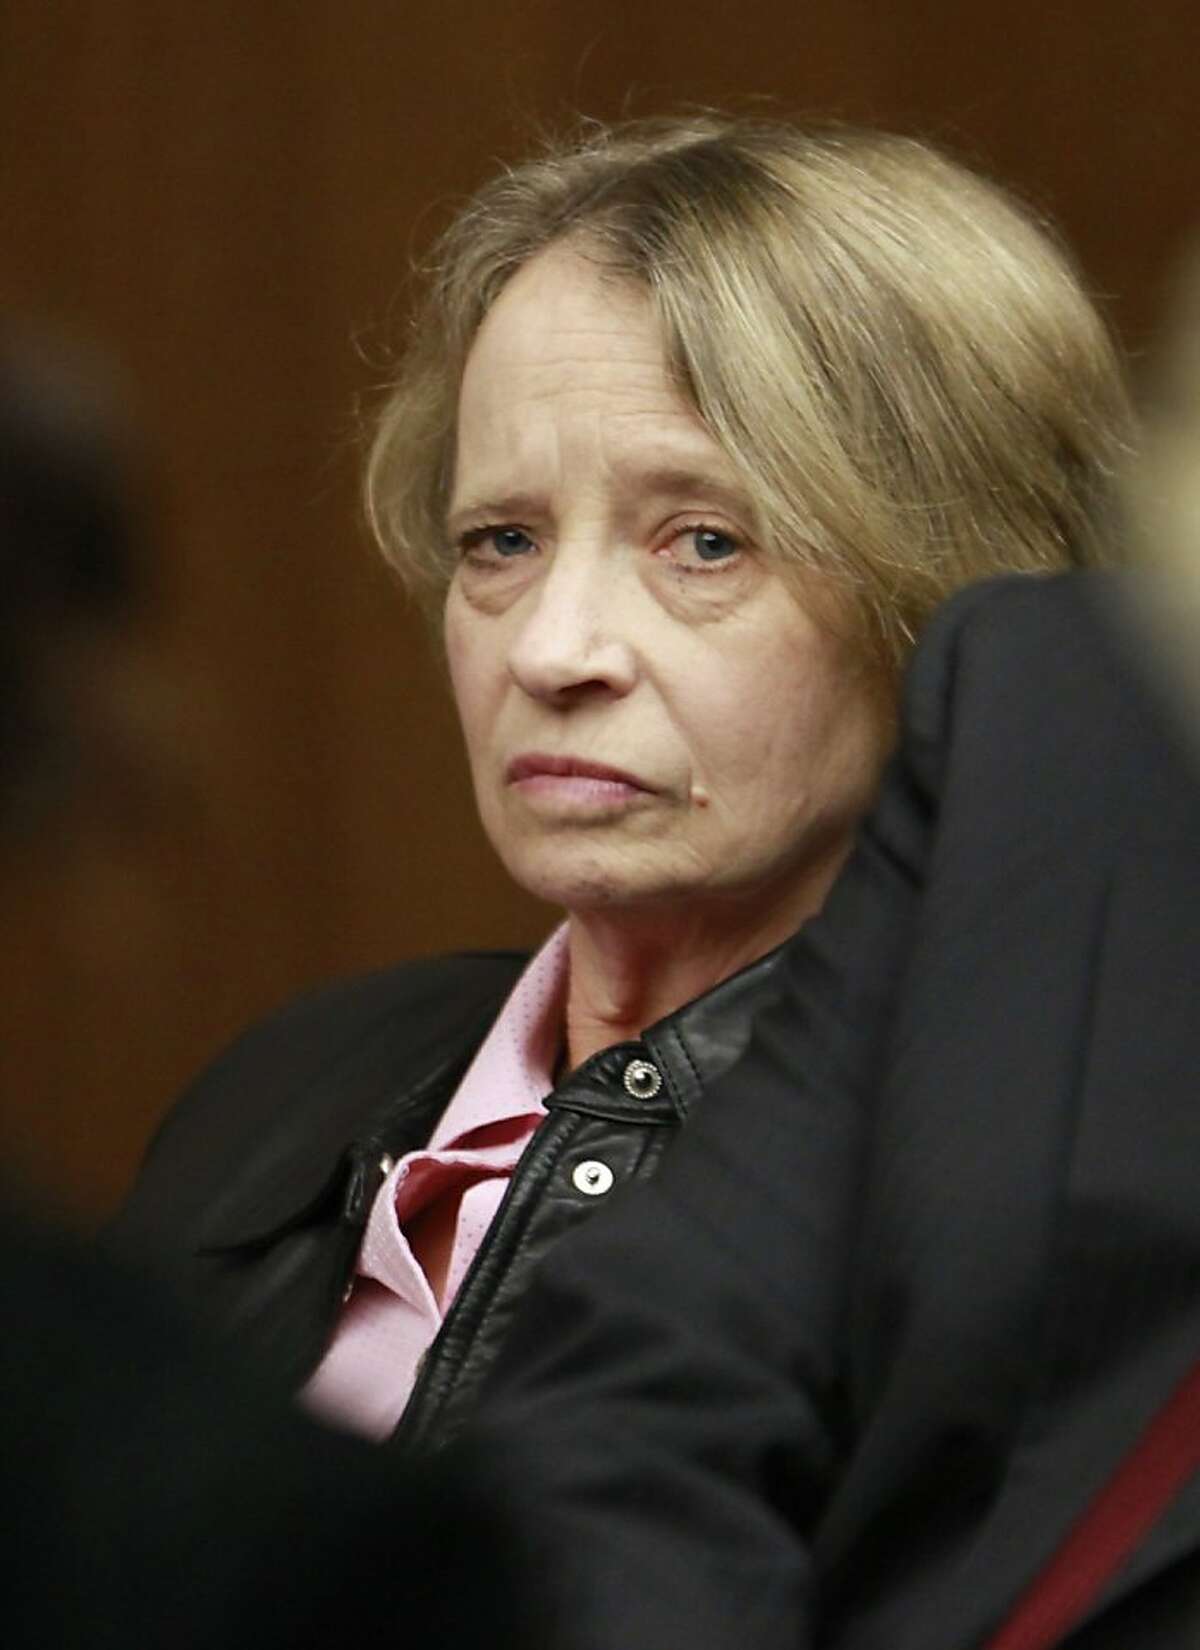 Former longtime San Francisco lab technician Deborah Madden appears for her arraignment for drug possession in a South San Francisco, Calif., courtroom, Monday, April 5, 2010. The San Francisco police crime lab was shut March 9, 2010 amid allegations in December that Madden stole cocaine evidence. Madden was in court on Monday on an unrelated charge to the lab scandal. (AP Photo/Paul Sakuma) Ran on: 04-06-2010 Former lab technician Deborah Madden pleaded not guilty Monday to a felony cocaine possession charge that is not directly related to the drug lab scandal. Ran on: 04-06-2010 Former lab technician Deborah Madden pleaded not guilty Monday to a felony cocaine possession charge that is not directly related to the drug lab scandal. Ran on: 04-14-2010 Ex-lab technician Deborah Madden said she put trace cocaine in bindles and took it home. Ran on: 04-14-2010 Ex-lab technician Deborah Madden said she put trace cocaine in bindles and took it home. Ran on: 04-16-2010 Deborah Madden has left her job at the lab, but has not been charged in connection with the allegations. Ran on: 04-20-2010 Deborah Madden, a longtime technician at the San Francisco police crime lab, is suspected of stealing cocaine booked as evidence. Ran on: 04-20-2010 Deborah Madden, a longtime technician at the San Francisco police crime lab, is suspected of stealing cocaine booked as evidence. Ran on: 04-25-2010 Deborah Madden is suspected of stealing evidence. Ran on: 05-23-2010 Deborah Madden is suspected of taking drugs from a crime lab. Ran on: 05-26-2010 Deborah Madden Ran on: 05-26-2010 Deborah Madden Ran on: 06-12-2010 Deborah Madden is suspected of stealing crime-lab drugs. Ran on: 06-15-2010 Deborah Maddens domestic violence conviction was disclosed. Ran on: 06-15-2010 Deborah Maddens domestic violence conviction was...